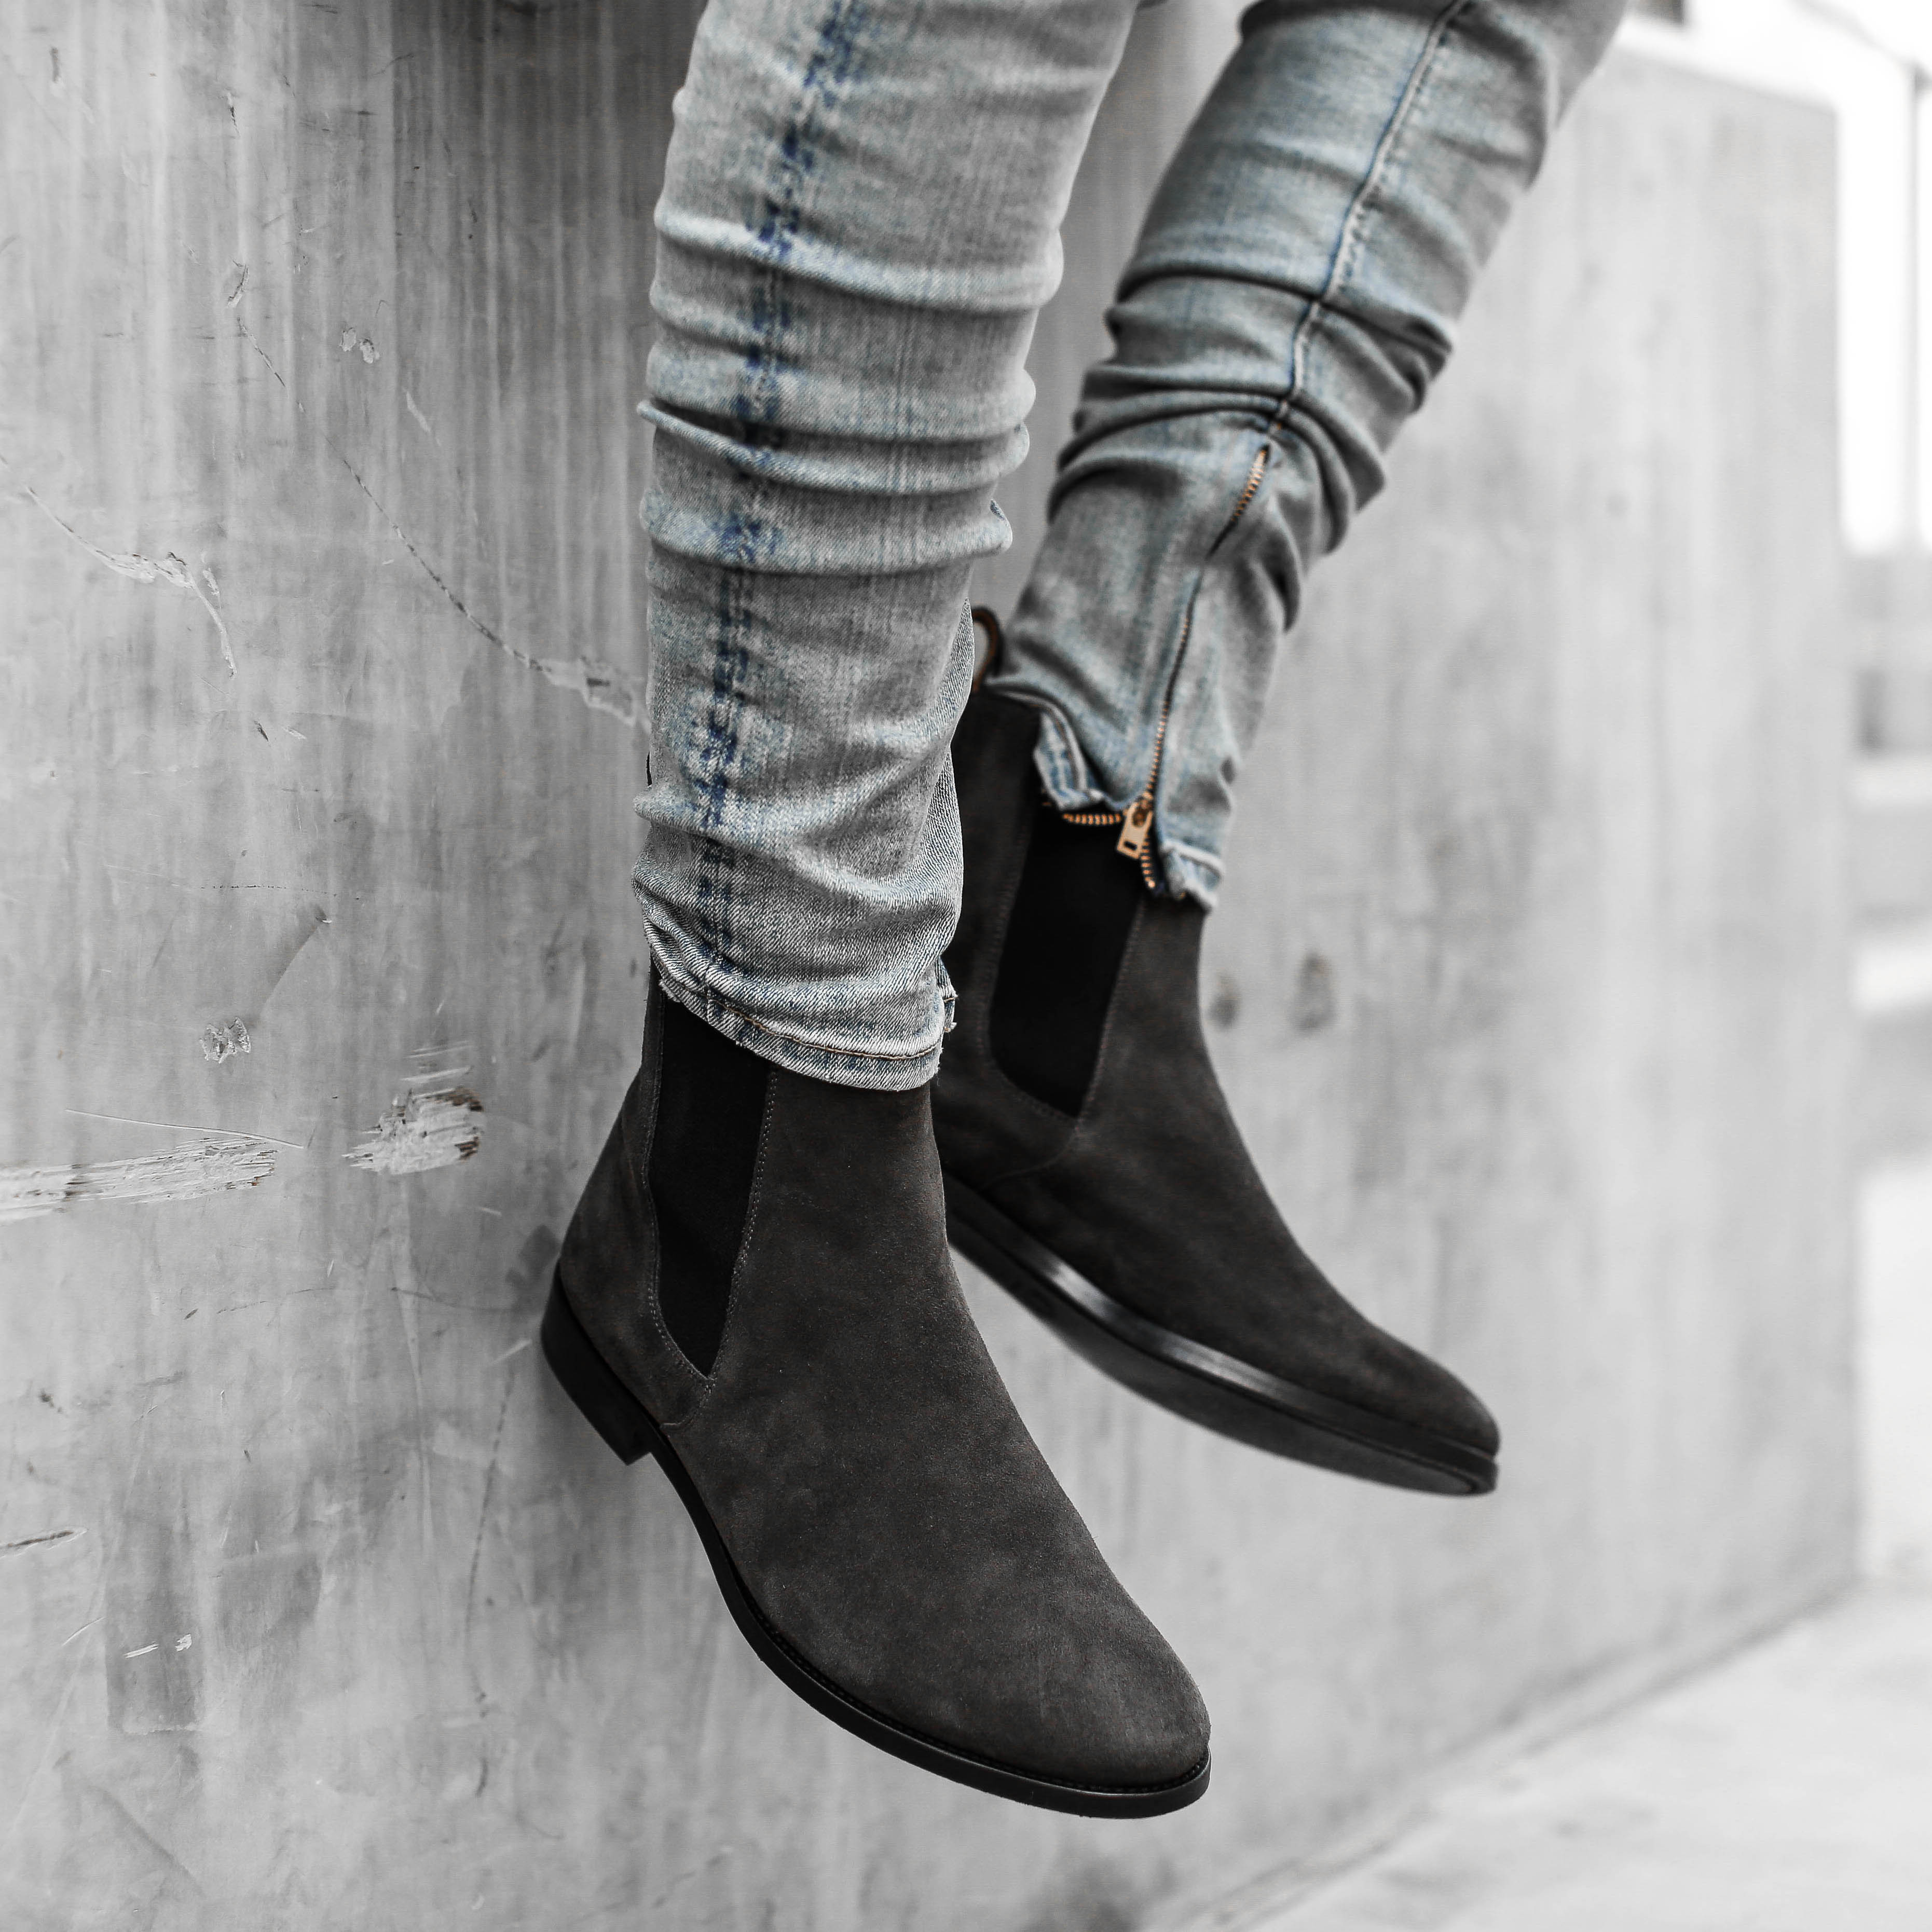 THE CLASSIC GREY CHELSEA BOOTS | ORO Los Angeles